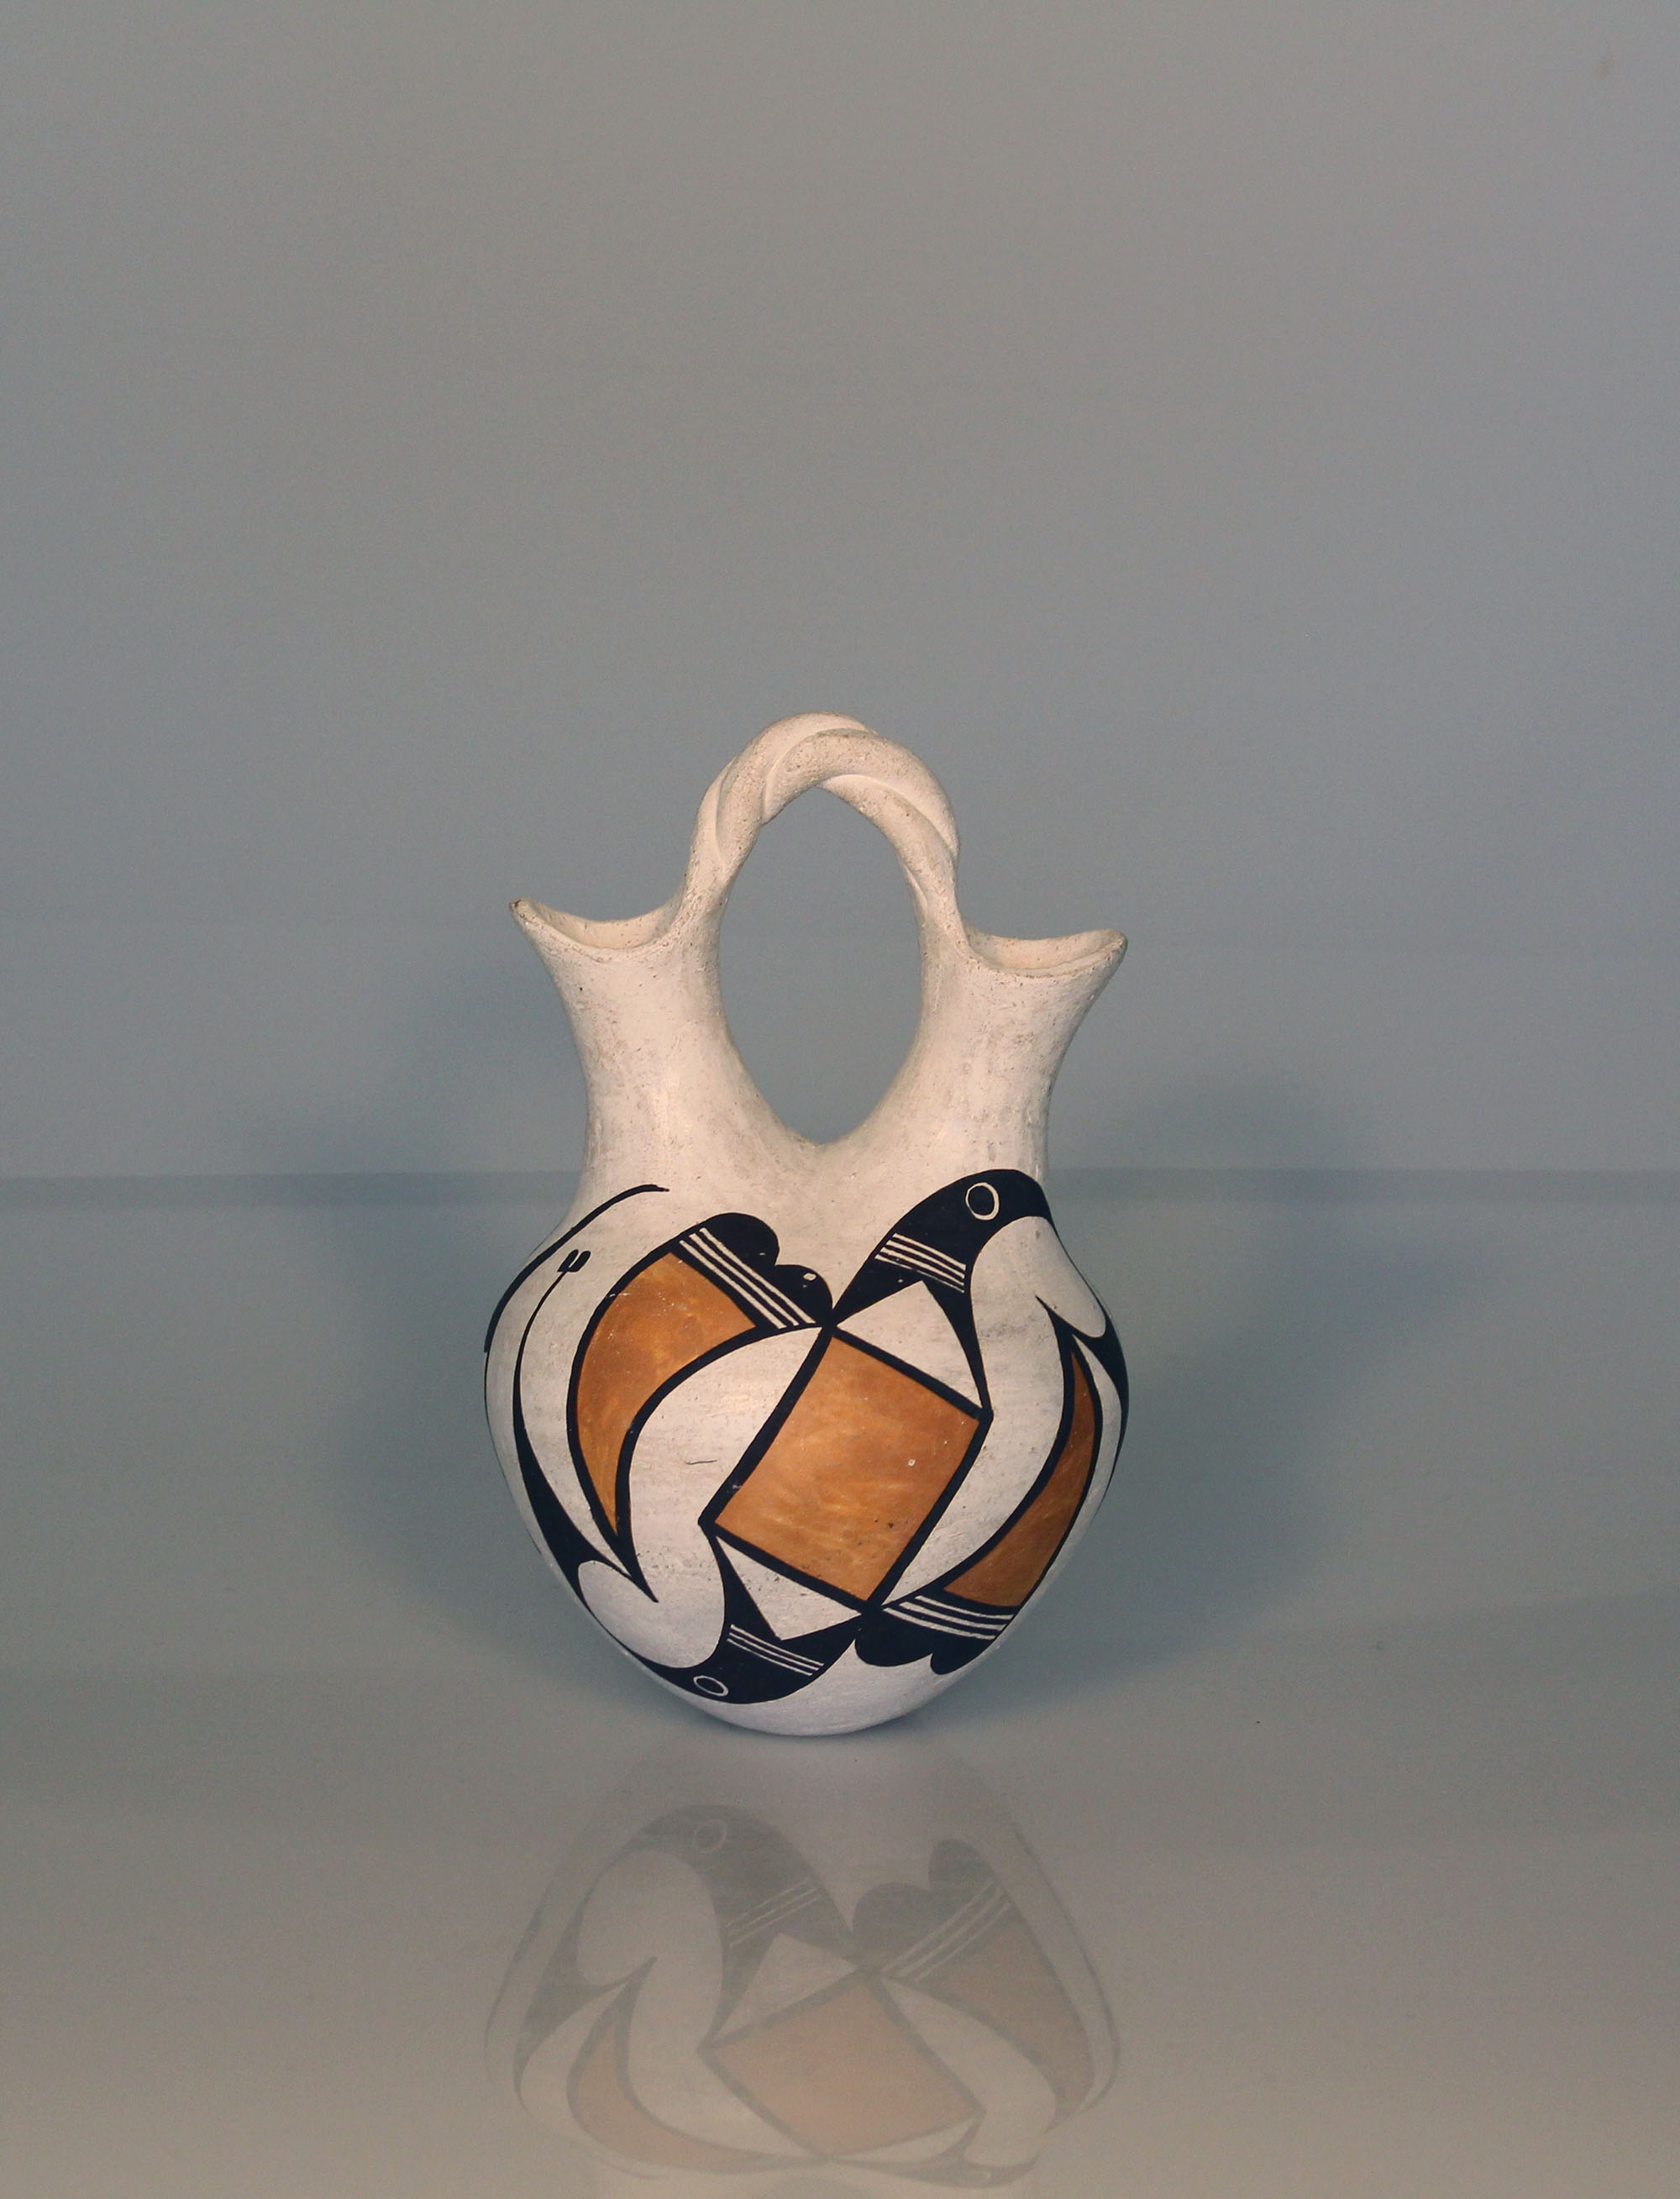 Wedding vase by Lucy Lewis, white with geometric black and orange designs.